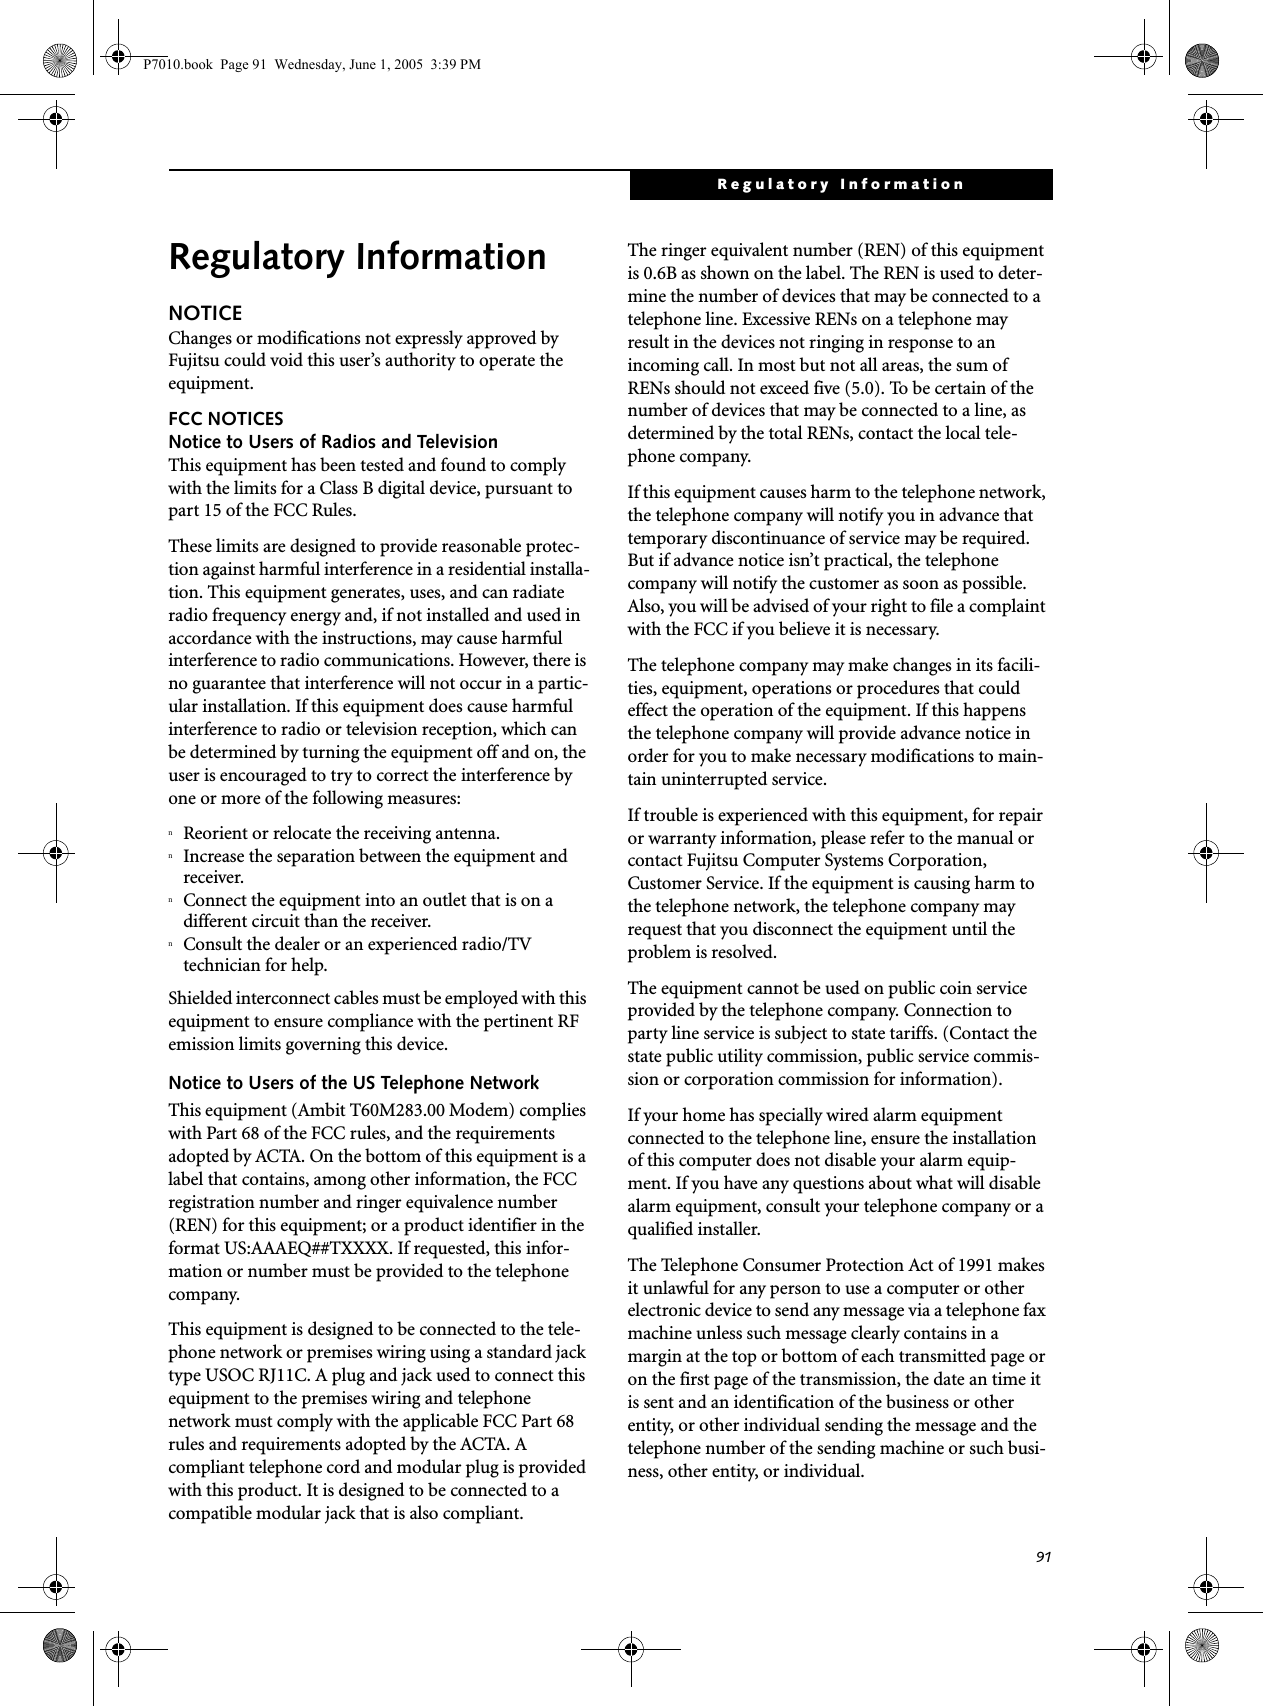 91Regulatory InformationRegulatory InformationNOTICEChanges or modifications not expressly approved by Fujitsu could void this user’s authority to operate the equipment.FCC NOTICESNotice to Users of Radios and TelevisionThis equipment has been tested and found to comply with the limits for a Class B digital device, pursuant to part 15 of the FCC Rules.These limits are designed to provide reasonable protec-tion against harmful interference in a residential installa-tion. This equipment generates, uses, and can radiate radio frequency energy and, if not installed and used in accordance with the instructions, may cause harmful interference to radio communications. However, there is no guarantee that interference will not occur in a partic-ular installation. If this equipment does cause harmful interference to radio or television reception, which can be determined by turning the equipment off and on, the user is encouraged to try to correct the interference by one or more of the following measures:nReorient or relocate the receiving antenna.nIncrease the separation between the equipment and receiver.nConnect the equipment into an outlet that is on a different circuit than the receiver.nConsult the dealer or an experienced radio/TVtechnician for help.Shielded interconnect cables must be employed with this equipment to ensure compliance with the pertinent RF emission limits governing this device. Notice to Users of the US Telephone NetworkThis equipment (Ambit T60M283.00 Modem) complies with Part 68 of the FCC rules, and the requirements adopted by ACTA. On the bottom of this equipment is a label that contains, among other information, the FCC registration number and ringer equivalence number (REN) for this equipment; or a product identifier in the format US:AAAEQ##TXXXX. If requested, this infor-mation or number must be provided to the telephone company.This equipment is designed to be connected to the tele-phone network or premises wiring using a standard jack type USOC RJ11C. A plug and jack used to connect this equipment to the premises wiring and telephone network must comply with the applicable FCC Part 68 rules and requirements adopted by the ACTA. A compliant telephone cord and modular plug is provided with this product. It is designed to be connected to a compatible modular jack that is also compliant.The ringer equivalent number (REN) of this equipment is 0.6B as shown on the label. The REN is used to deter-mine the number of devices that may be connected to a telephone line. Excessive RENs on a telephone may result in the devices not ringing in response to an incoming call. In most but not all areas, the sum of RENs should not exceed five (5.0). To be certain of the number of devices that may be connected to a line, as determined by the total RENs, contact the local tele-phone company. If this equipment causes harm to the telephone network, the telephone company will notify you in advance that temporary discontinuance of service may be required. But if advance notice isn’t practical, the telephone company will notify the customer as soon as possible. Also, you will be advised of your right to file a complaint with the FCC if you believe it is necessary.The telephone company may make changes in its facili-ties, equipment, operations or procedures that could effect the operation of the equipment. If this happens the telephone company will provide advance notice in order for you to make necessary modifications to main-tain uninterrupted service. If trouble is experienced with this equipment, for repair or warranty information, please refer to the manual or contact Fujitsu Computer Systems Corporation, Customer Service. If the equipment is causing harm to the telephone network, the telephone company may request that you disconnect the equipment until the problem is resolved.The equipment cannot be used on public coin service provided by the telephone company. Connection to party line service is subject to state tariffs. (Contact the state public utility commission, public service commis-sion or corporation commission for information). If your home has specially wired alarm equipment connected to the telephone line, ensure the installation of this computer does not disable your alarm equip-ment. If you have any questions about what will disable alarm equipment, consult your telephone company or a qualified installer.The Telephone Consumer Protection Act of 1991 makes it unlawful for any person to use a computer or other electronic device to send any message via a telephone fax machine unless such message clearly contains in a margin at the top or bottom of each transmitted page or on the first page of the transmission, the date an time it is sent and an identification of the business or other entity, or other individual sending the message and the telephone number of the sending machine or such busi-ness, other entity, or individual.P7010.book  Page 91  Wednesday, June 1, 2005  3:39 PM